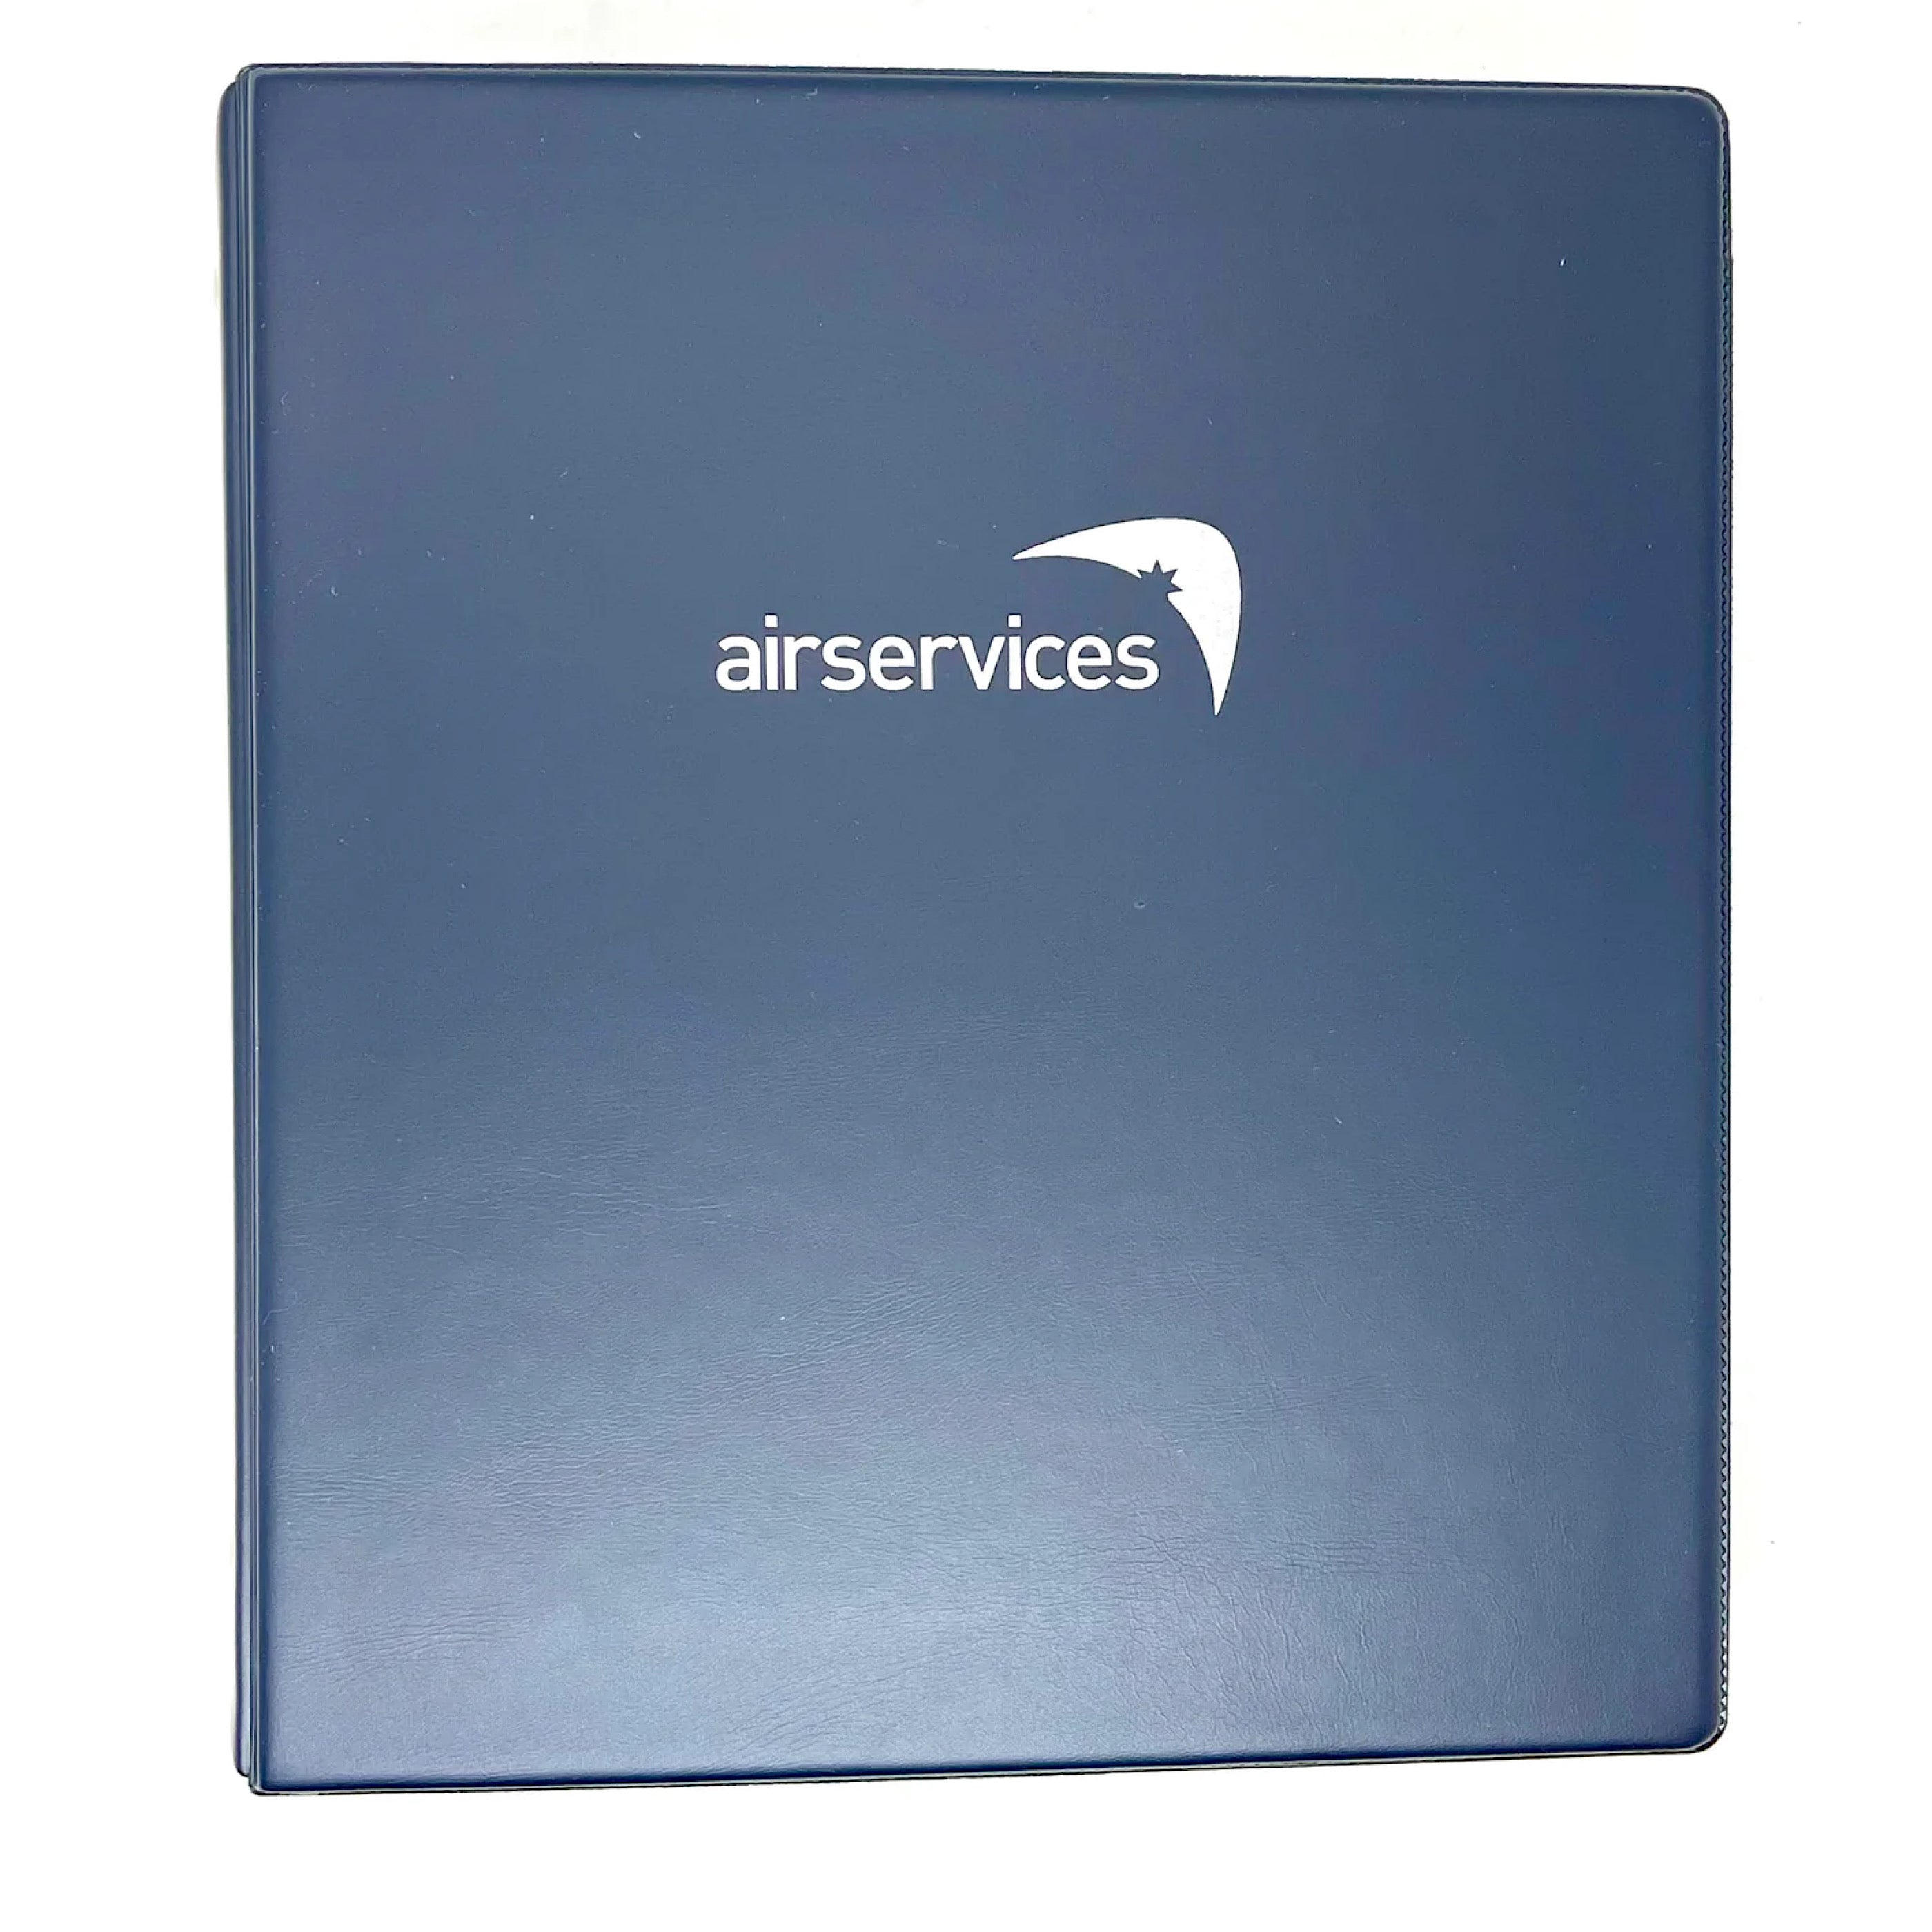 AIP - Aeronautical Information Publication Complete with Binder